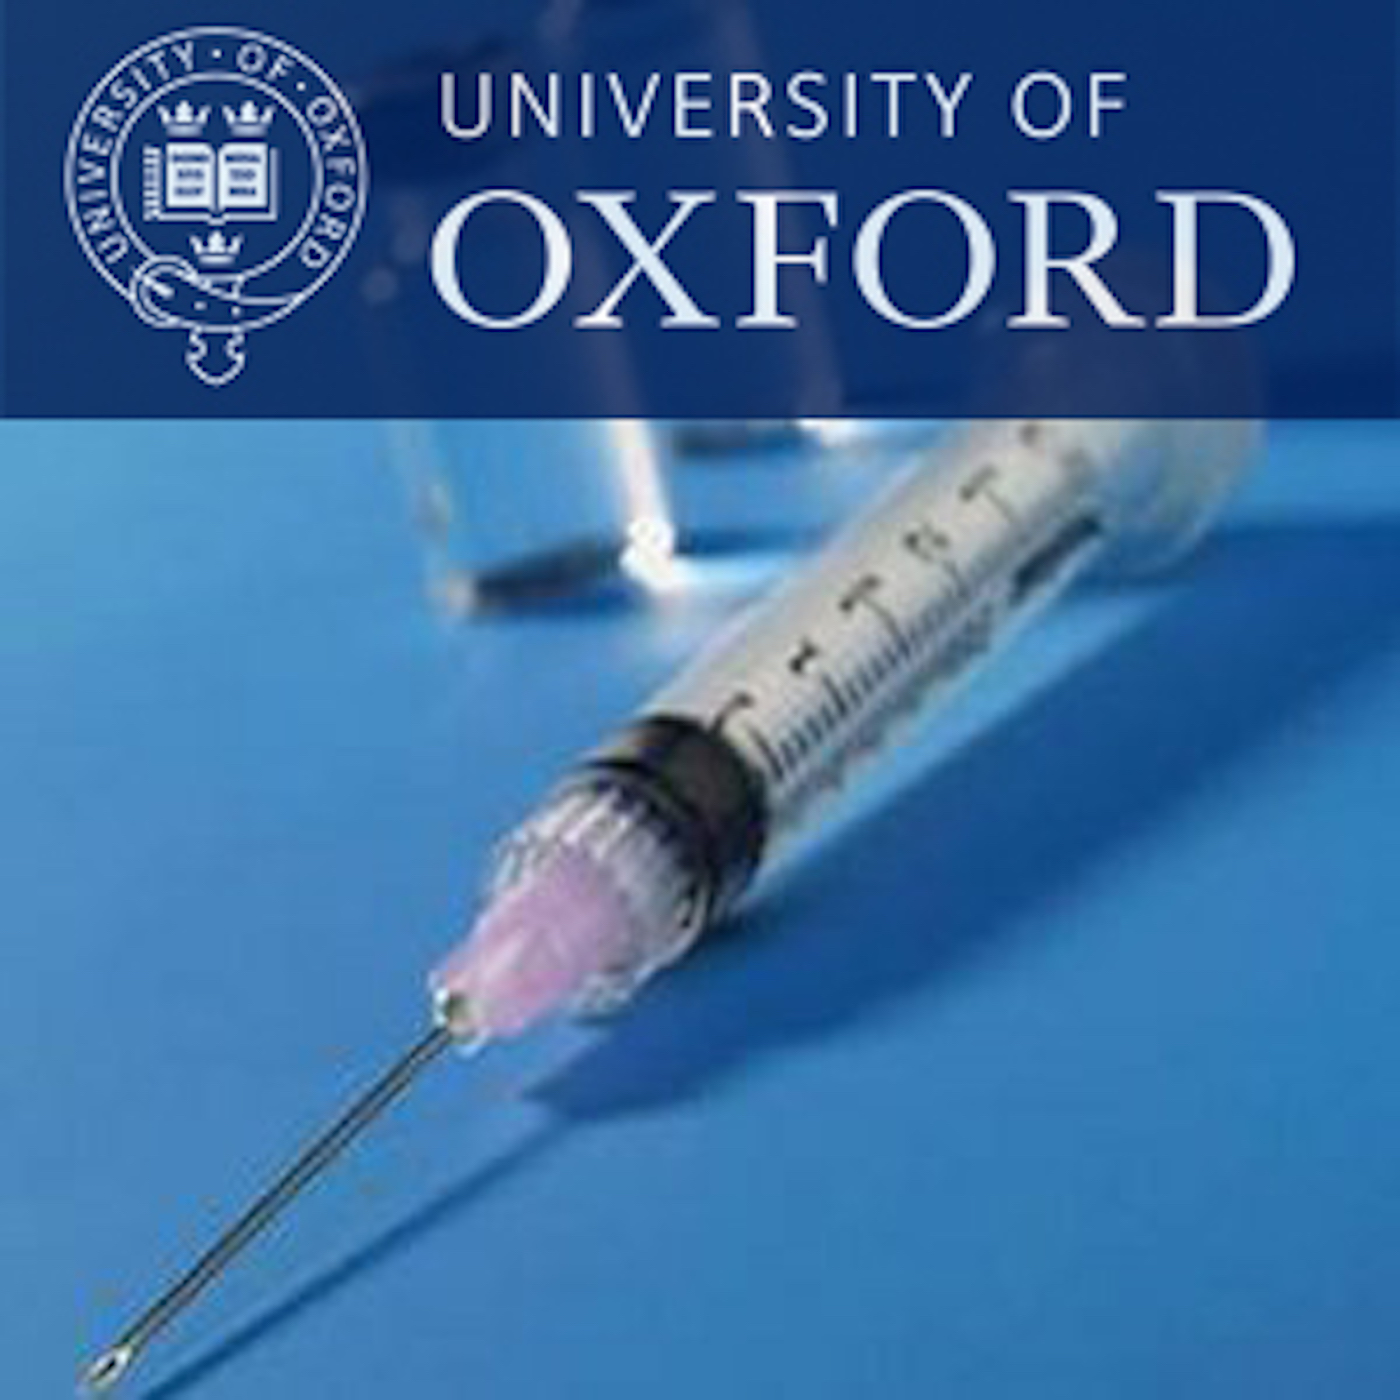 Oxford Vaccinology Programme